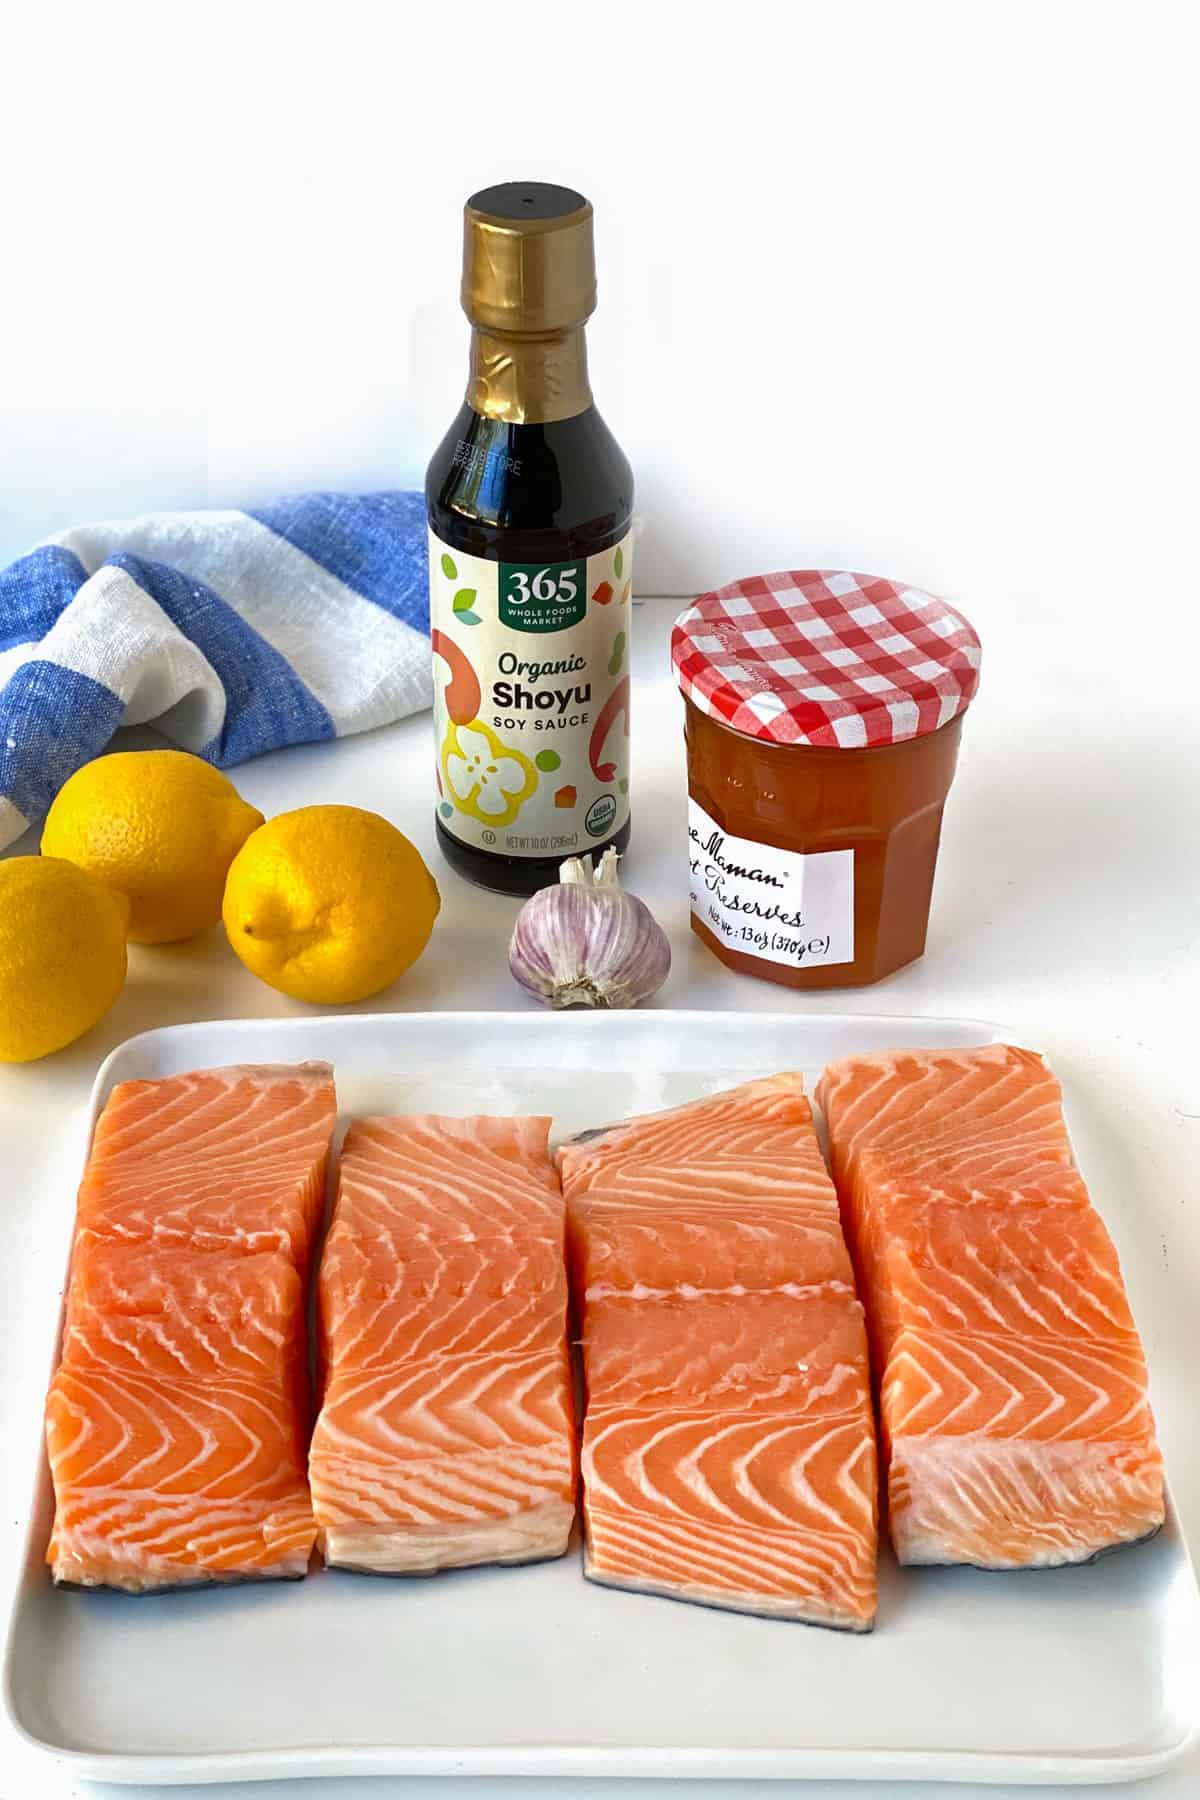 4 salmon fillets on a square white plate in the foreground, behind it are 3 whole lemons, a head of garlic, a bottle of soy sauce and a jar of apricots preserves.